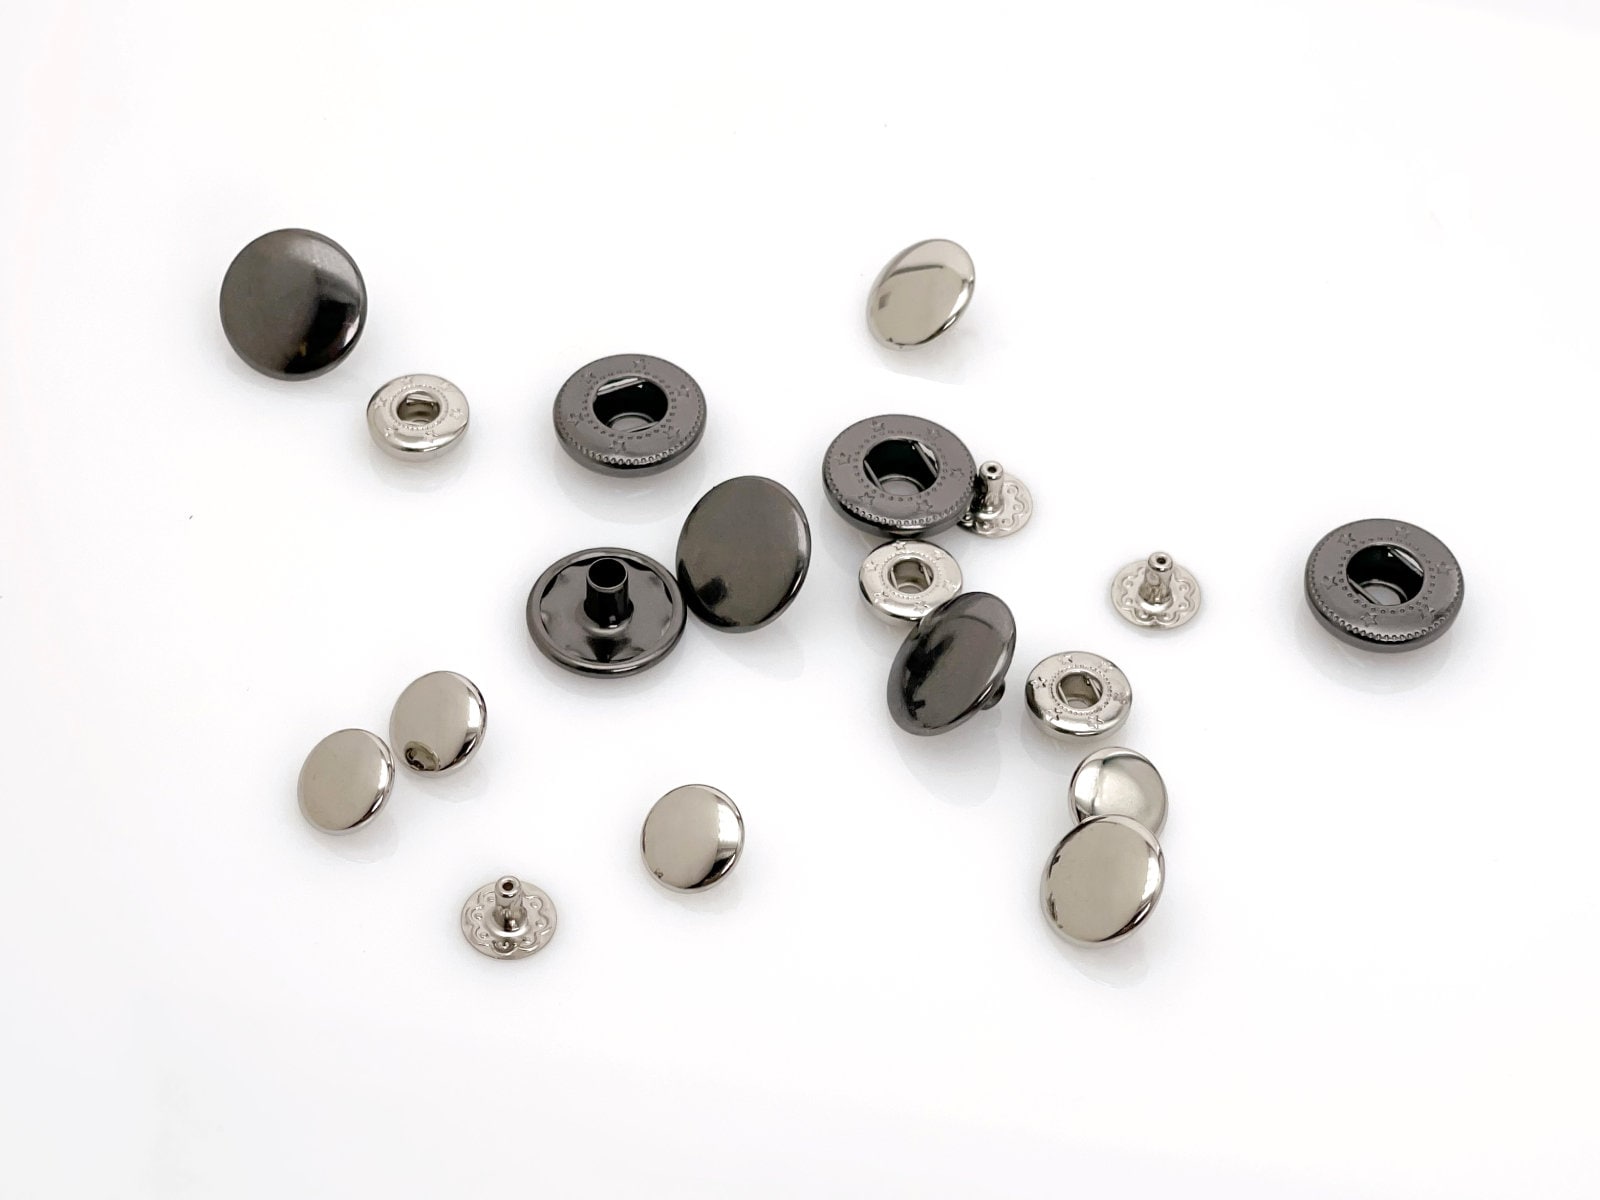 Metal Snaps, Spring Snap Buttons 10mm 12.5mm 15mm Snaps 633 831 655 Snaps P  